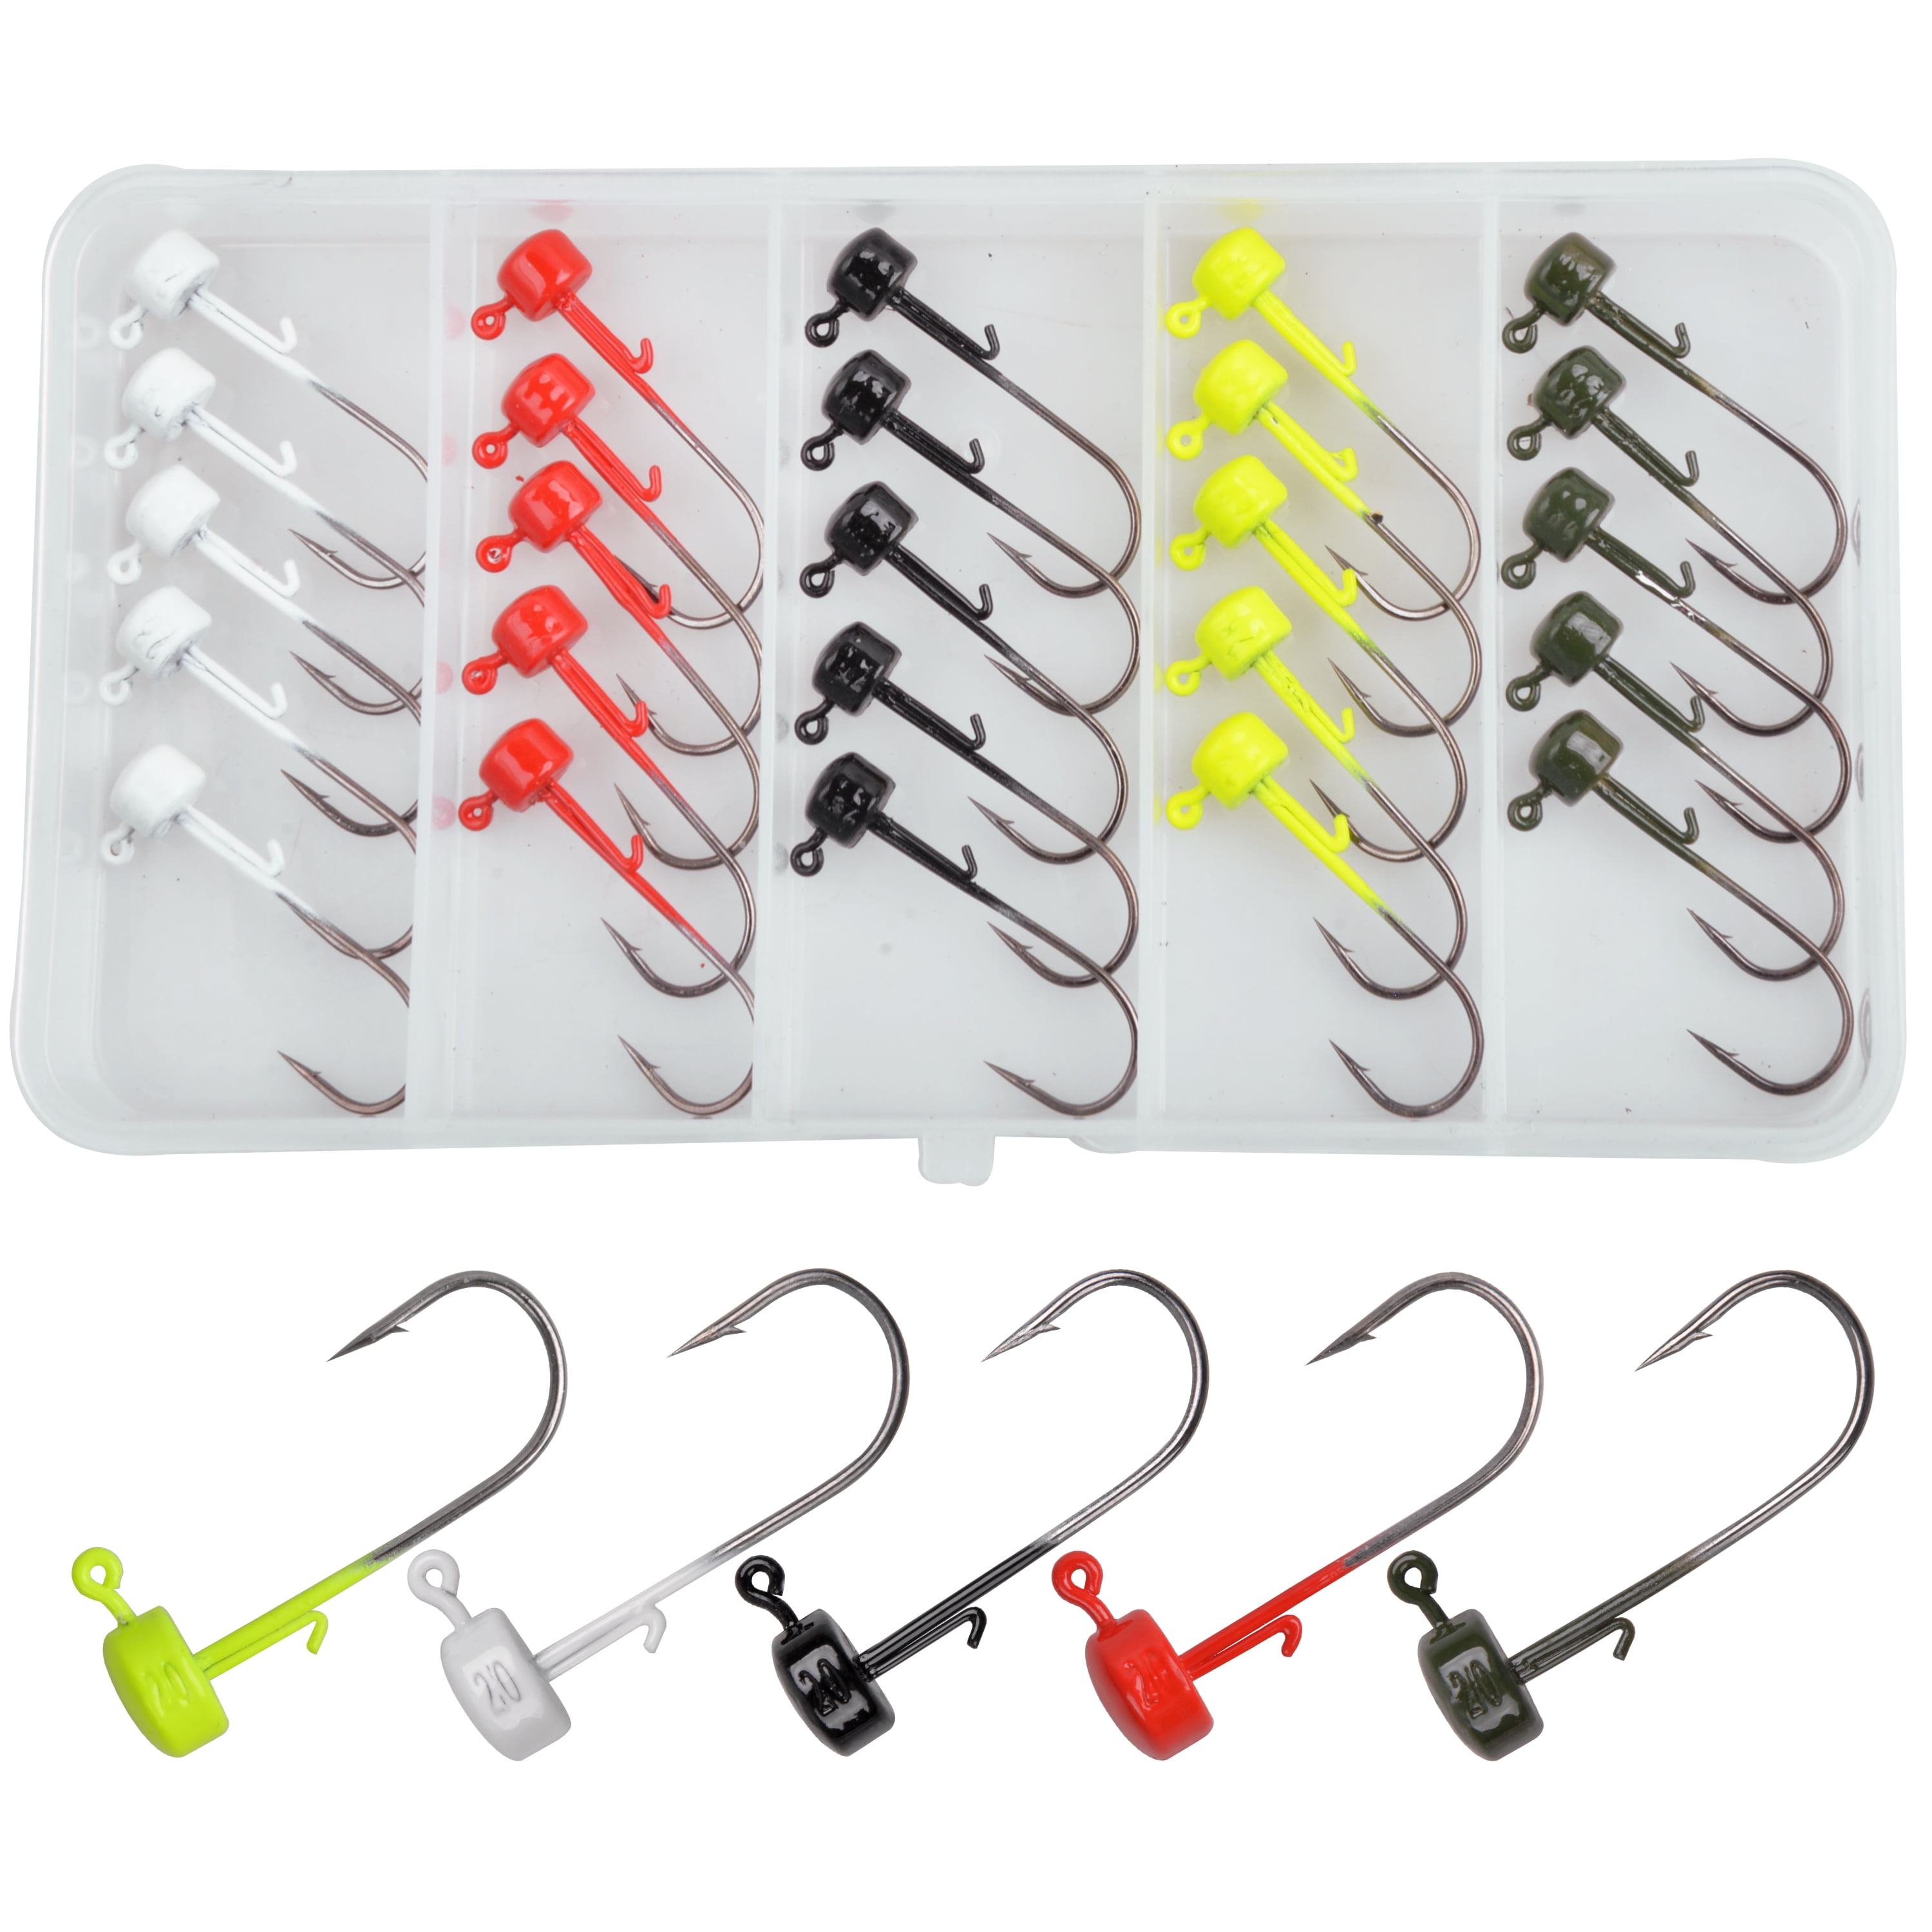 OROOTL Ned Rig Jig Heads Kit, 25Pcs Crappie Jig Heads Finesse